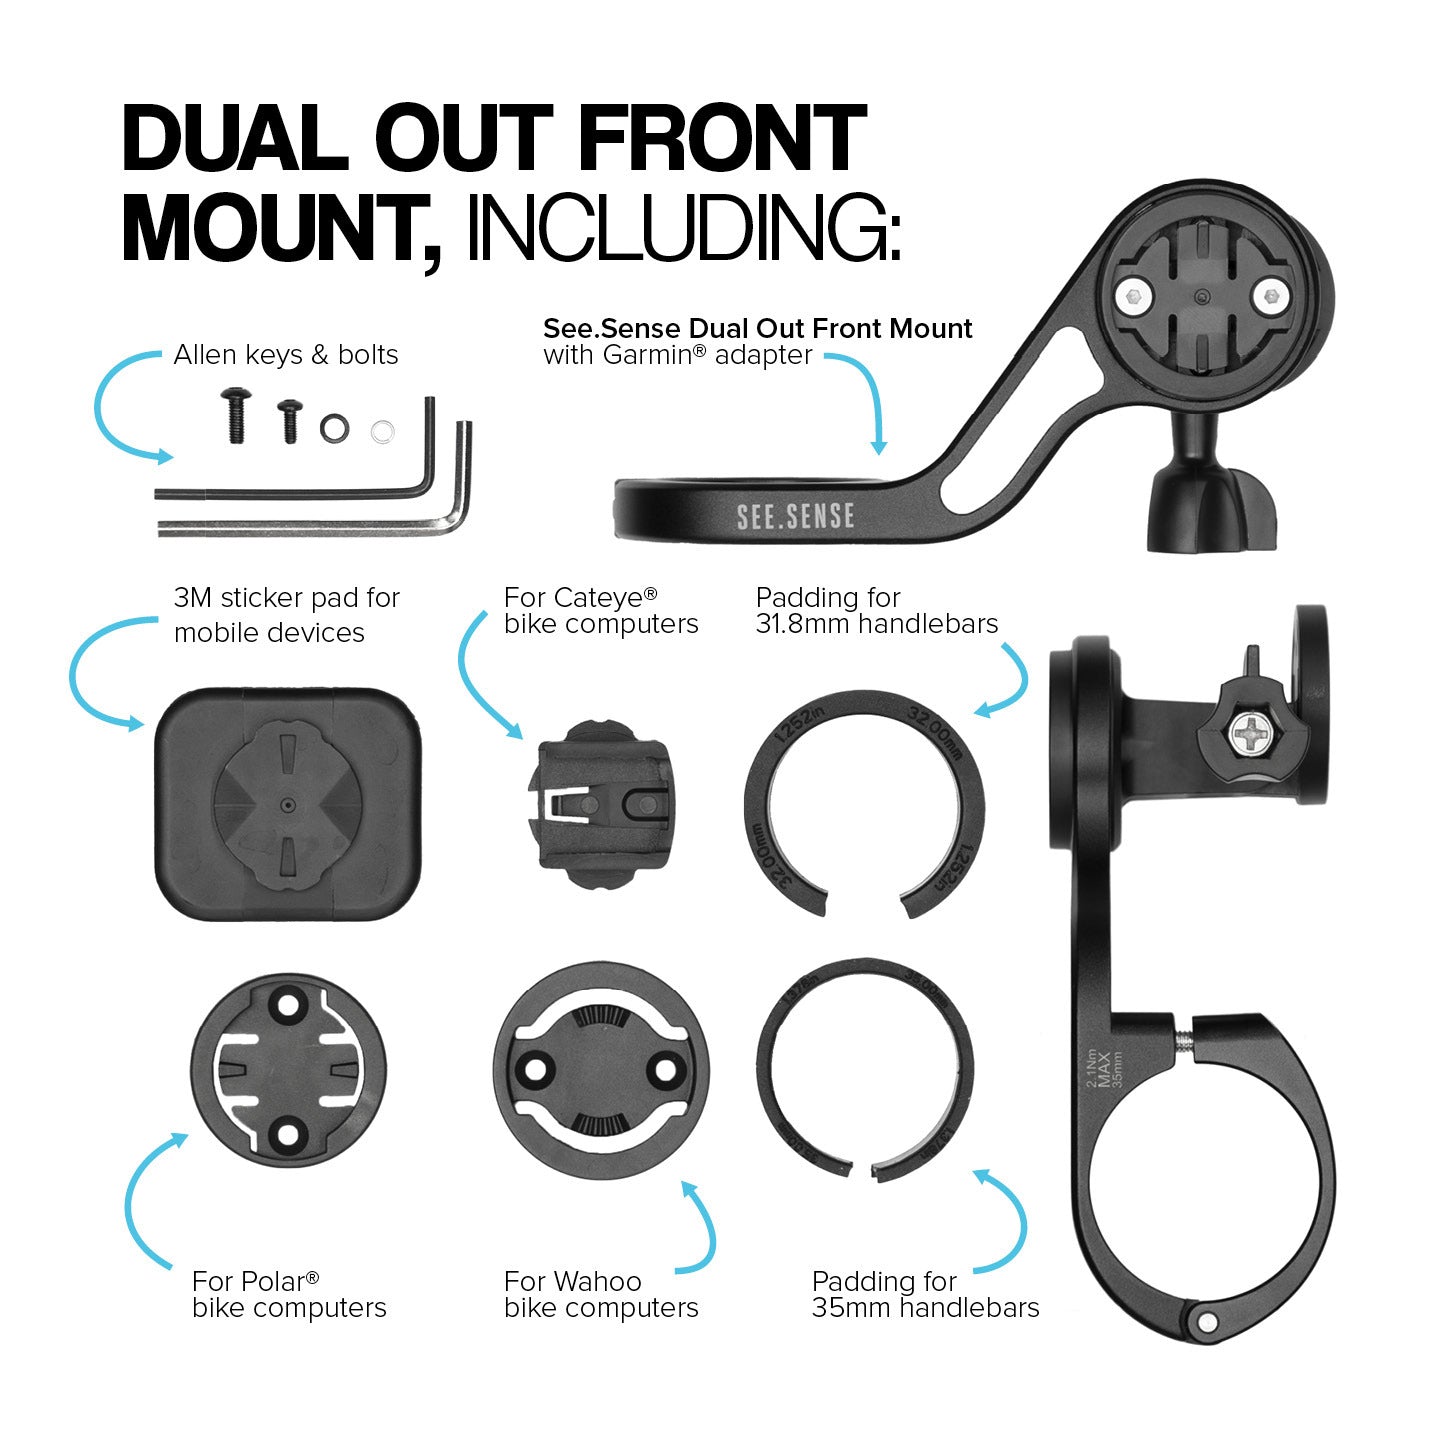 Dual Out Front Mount